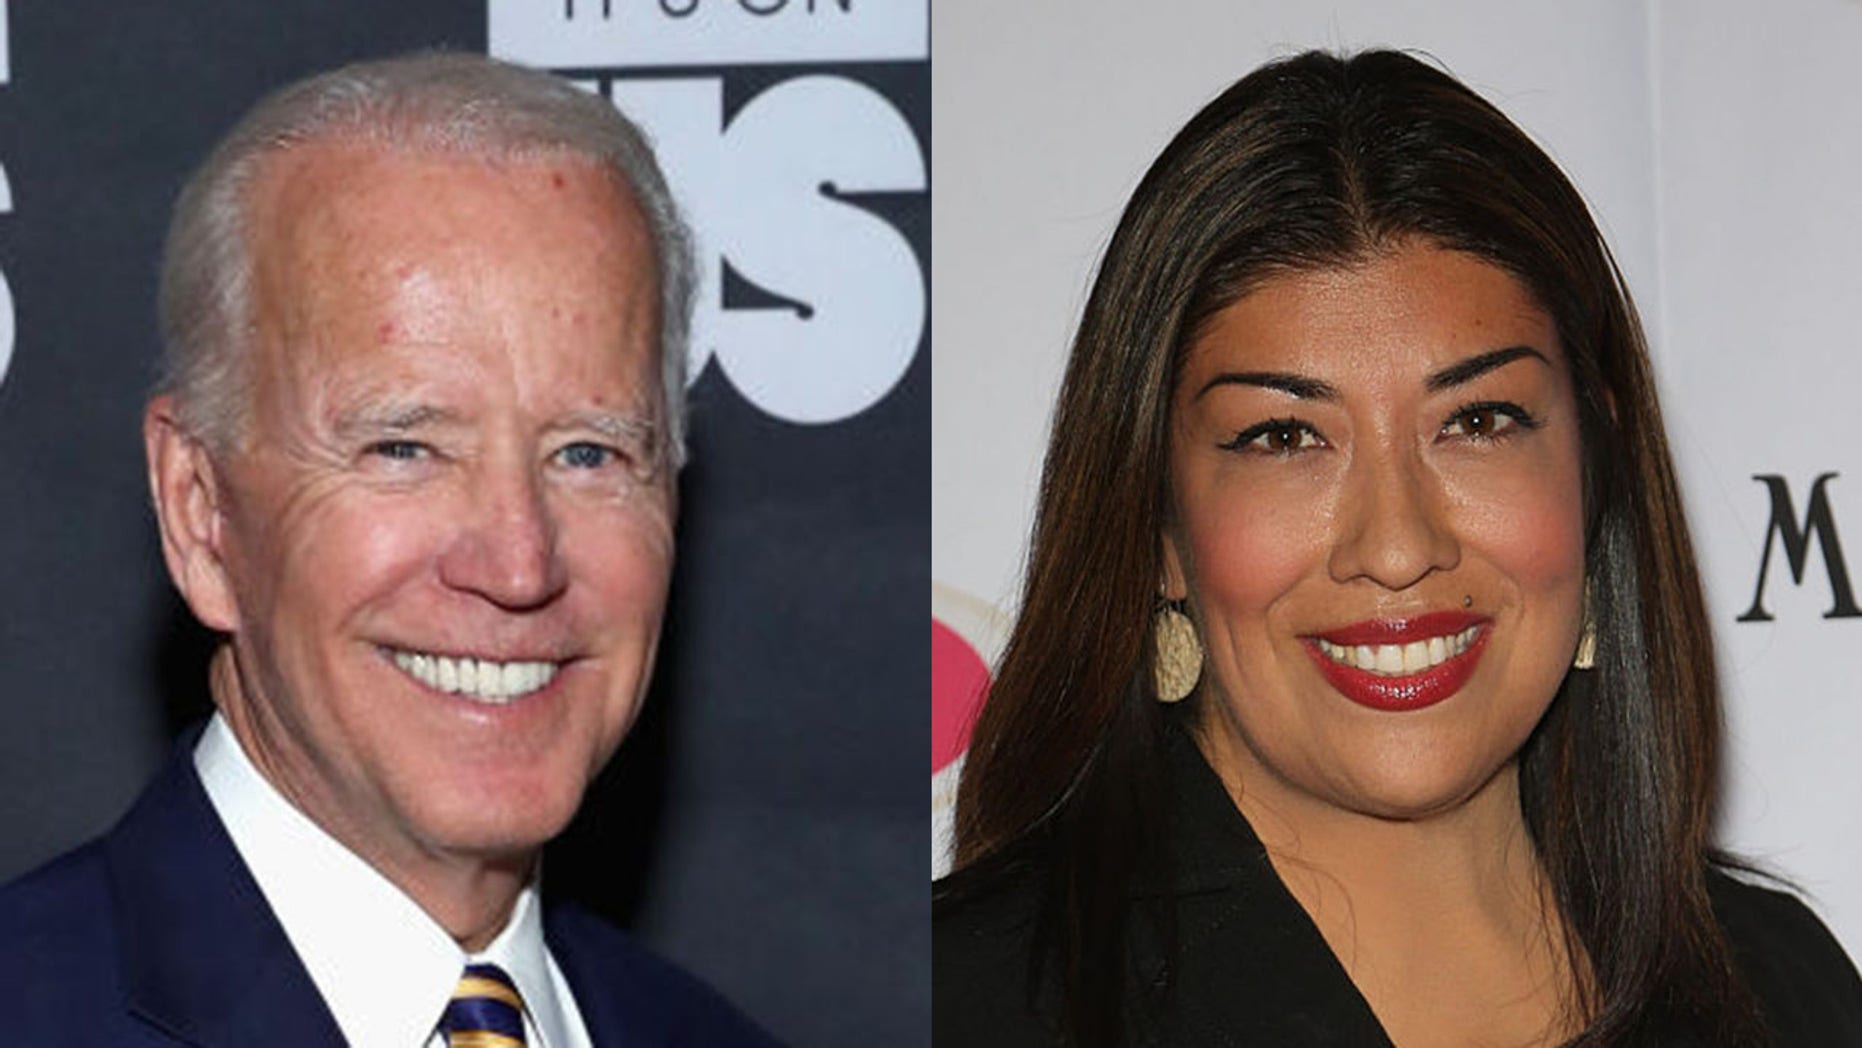 Joe Biden Accused Of Inappropriate Conduct By Former Nevada Dem Candidate Fox News 7144